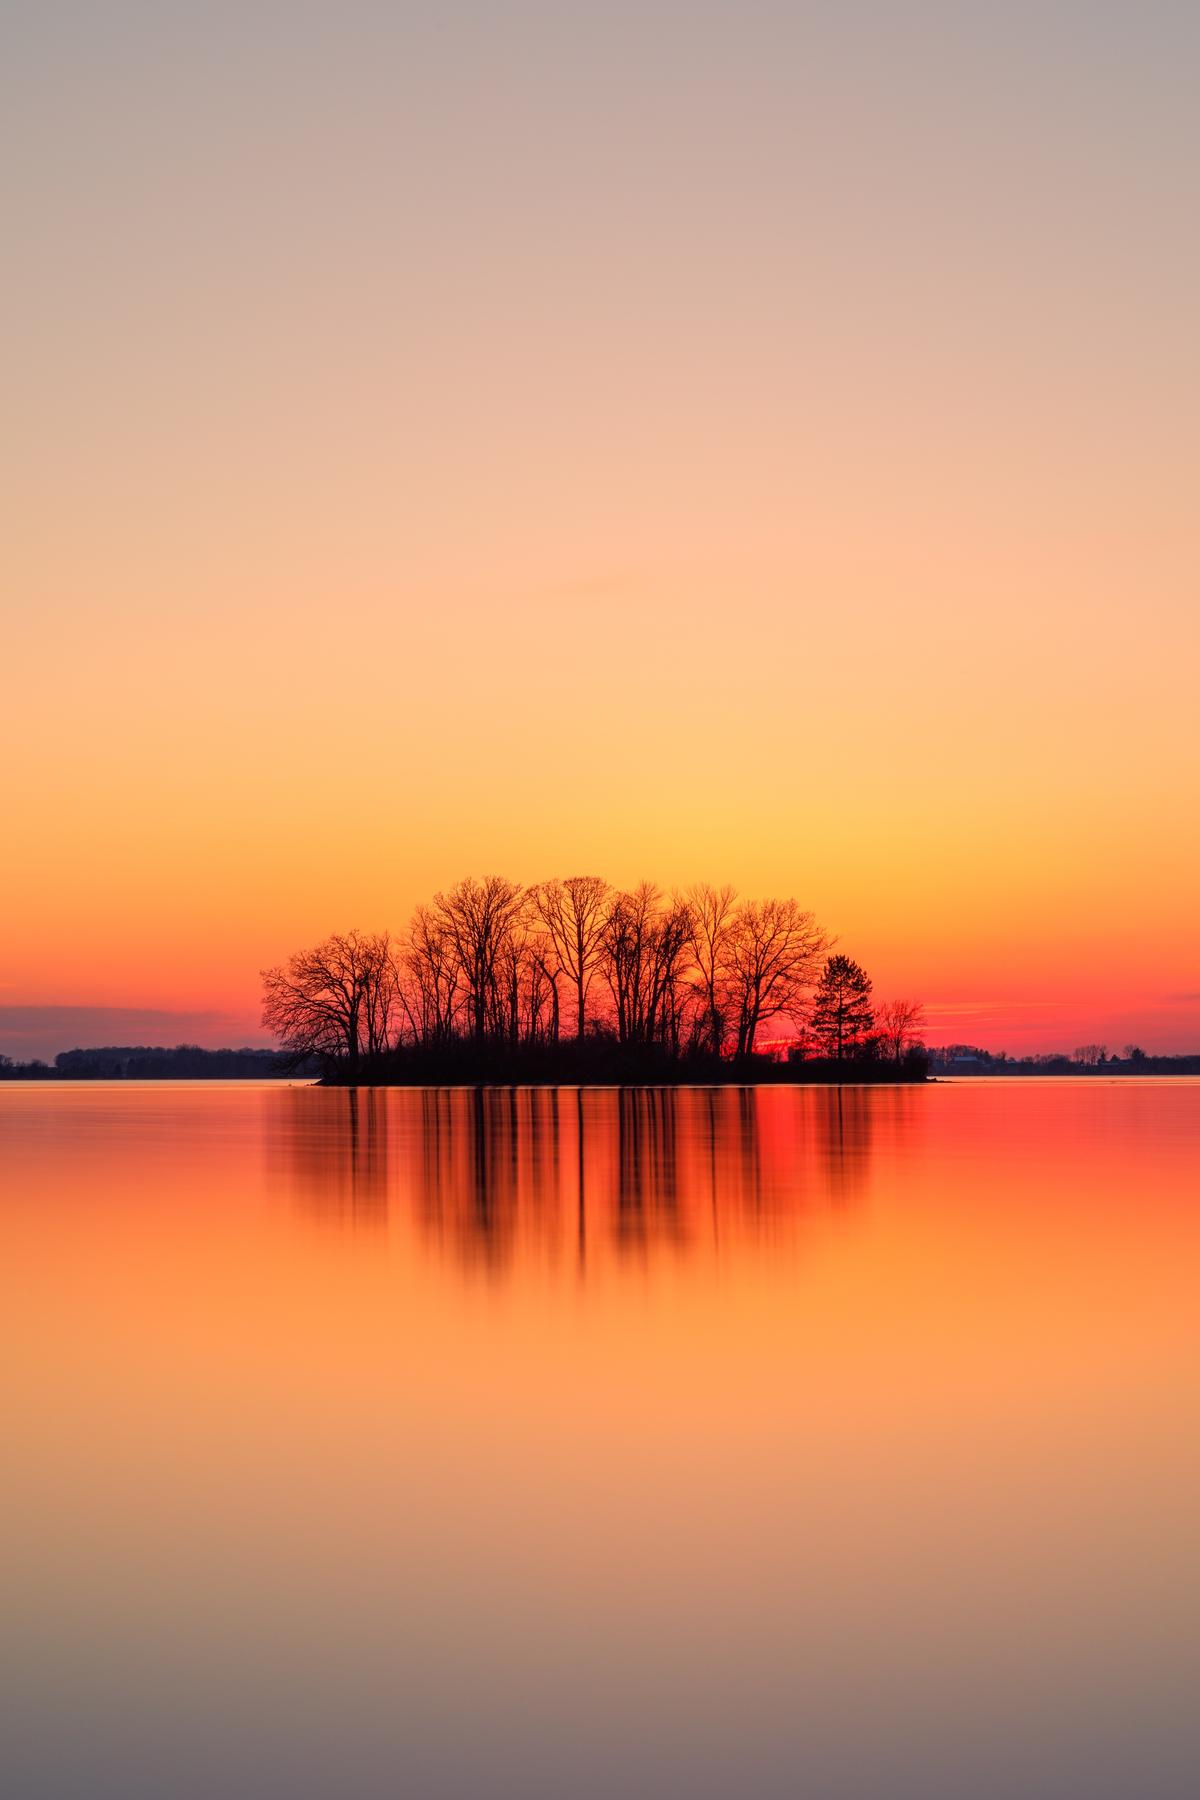 Sunset featuring trees and water